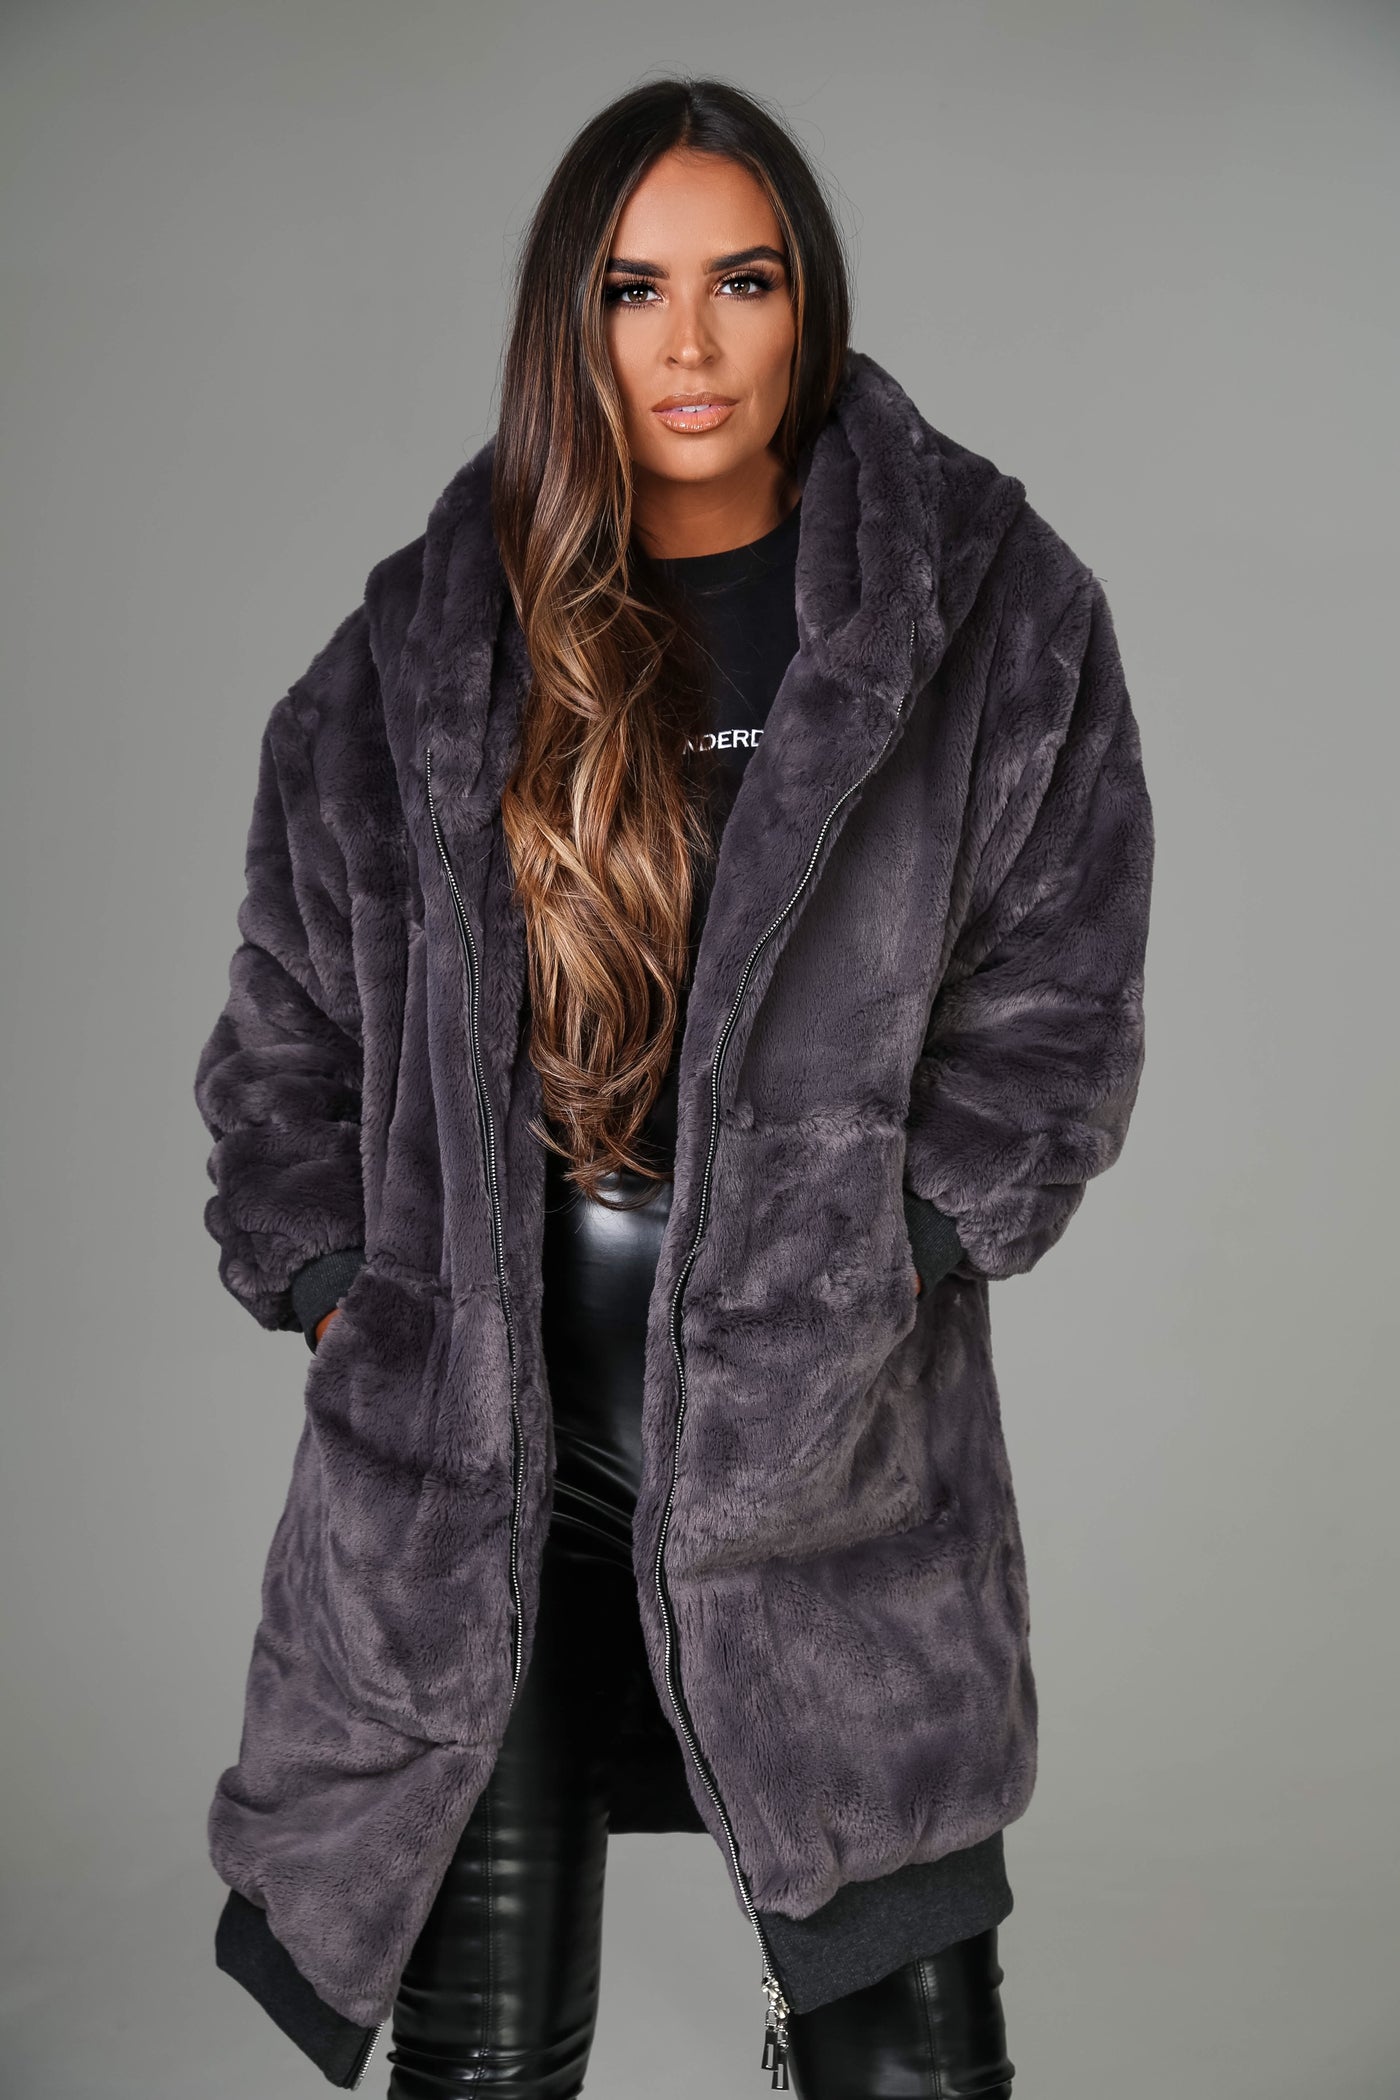 GiGi Over Sized Coat In Charcoal